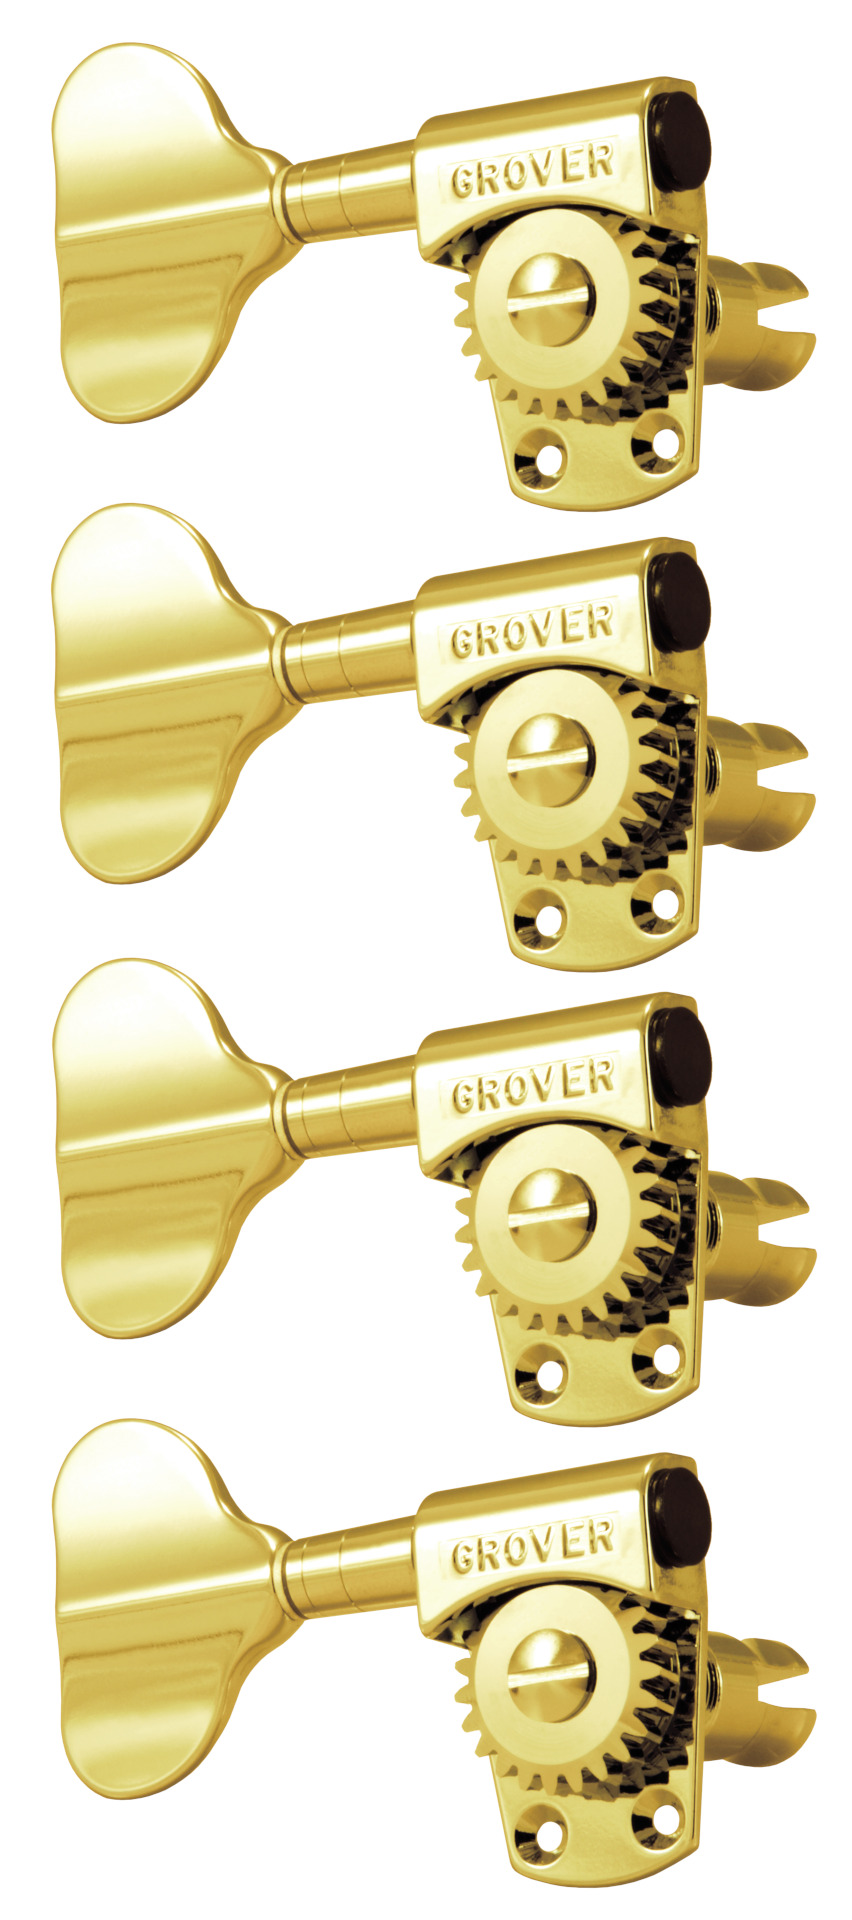 Grover 145GL4 Titan Electric Bass Machines - Bass Machine Heads, 4-in-Line, Lefthand, Treble Side (Right) - Gold